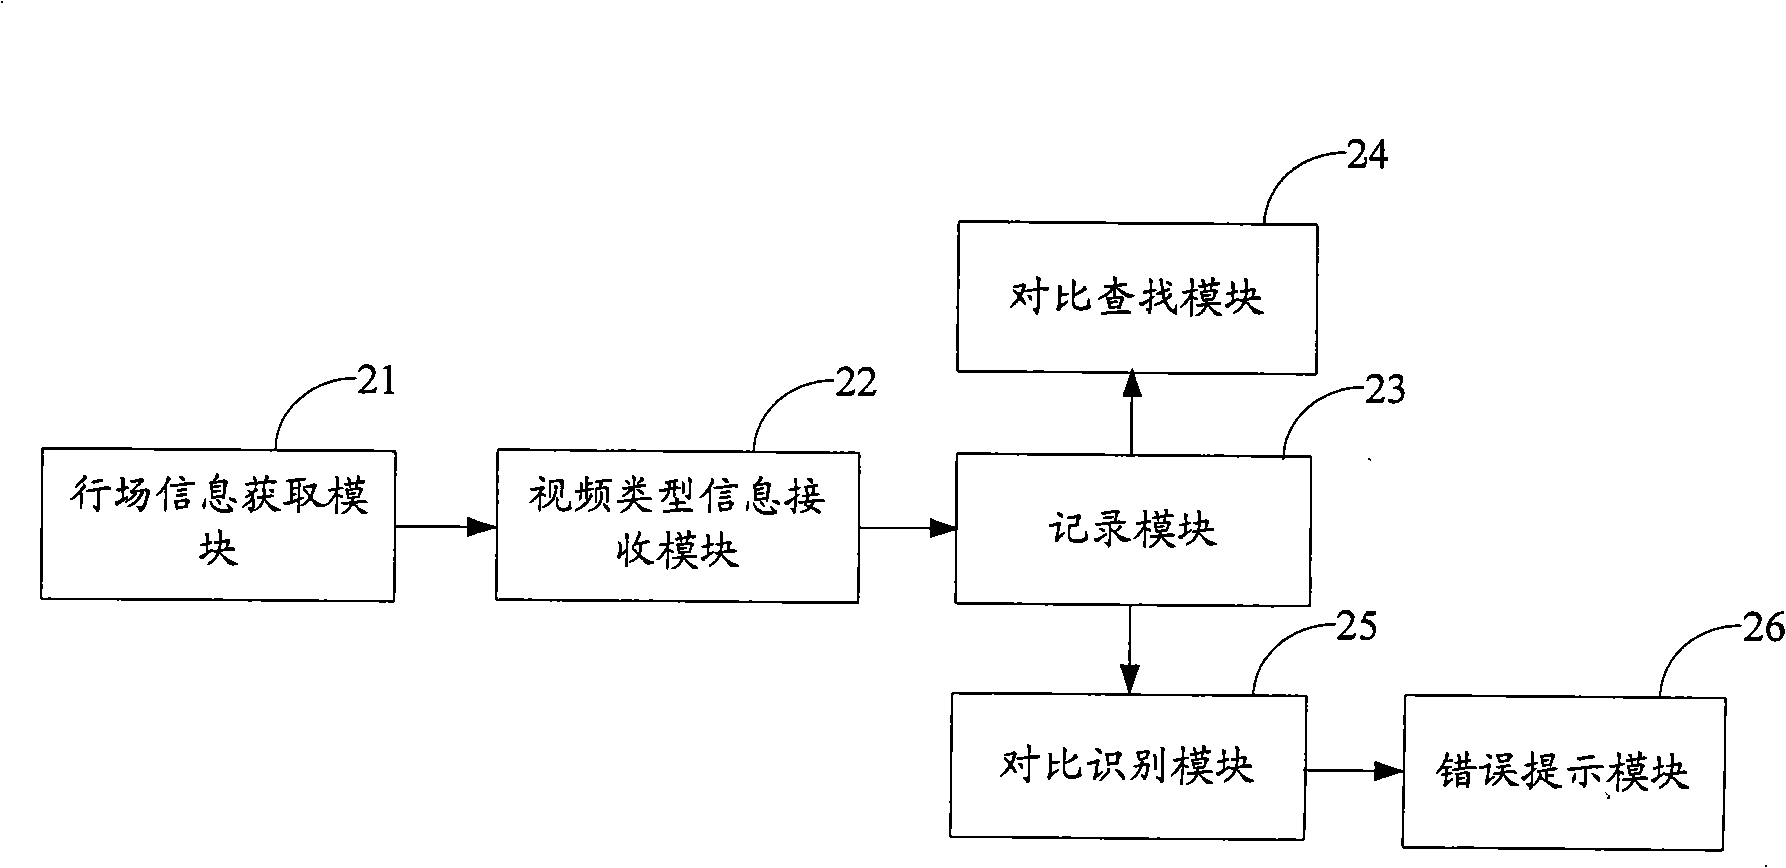 Recognition method and system for video signal, and video terminal display device